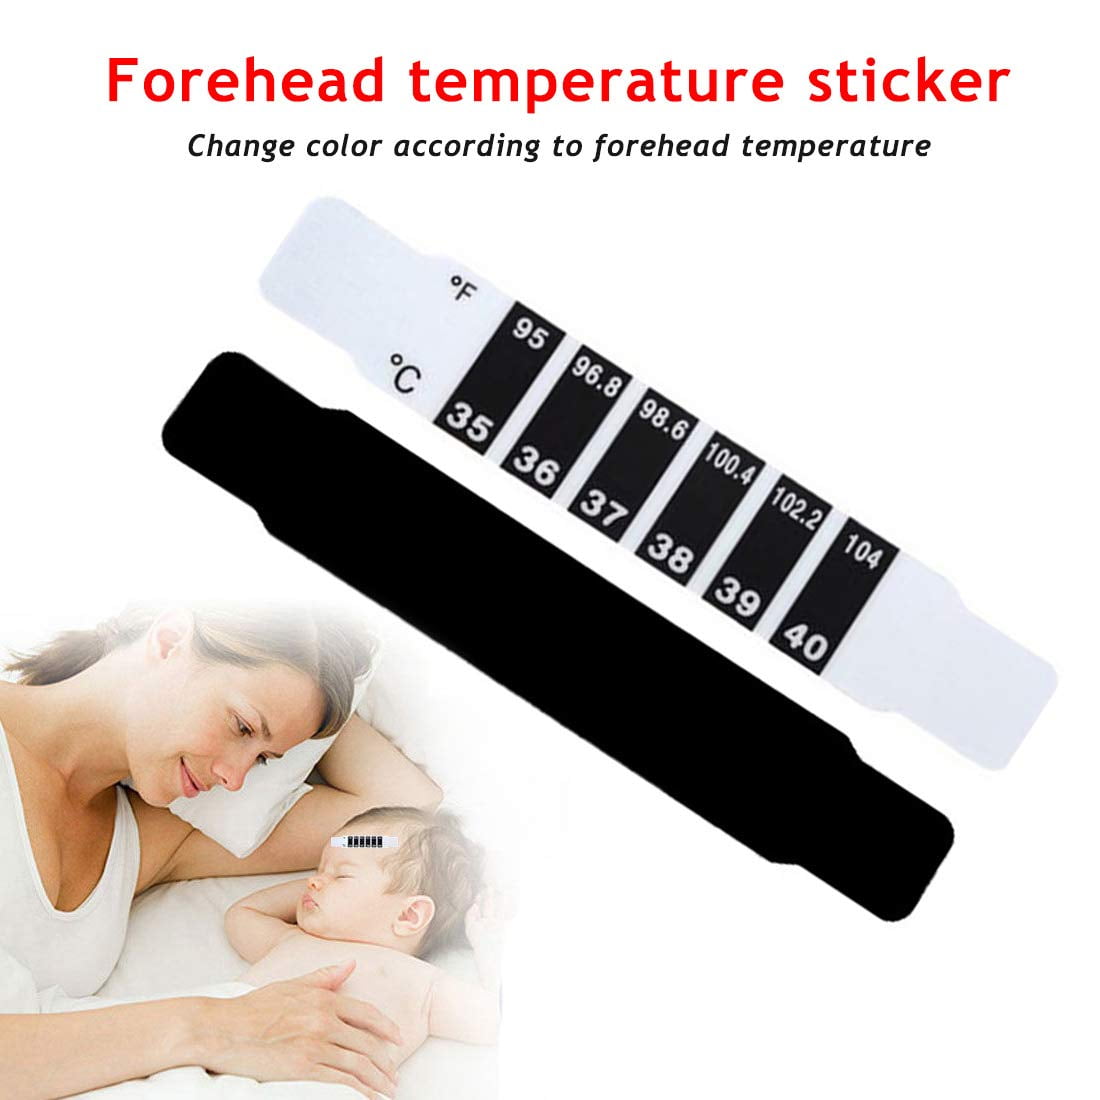 No Hassle, Quick Read Forehead Thermometer Strips 2 Pack. Great for  Checking Fever Temp of Infants, Babies, Toddlers, Kids and Adults. Best  Reusable